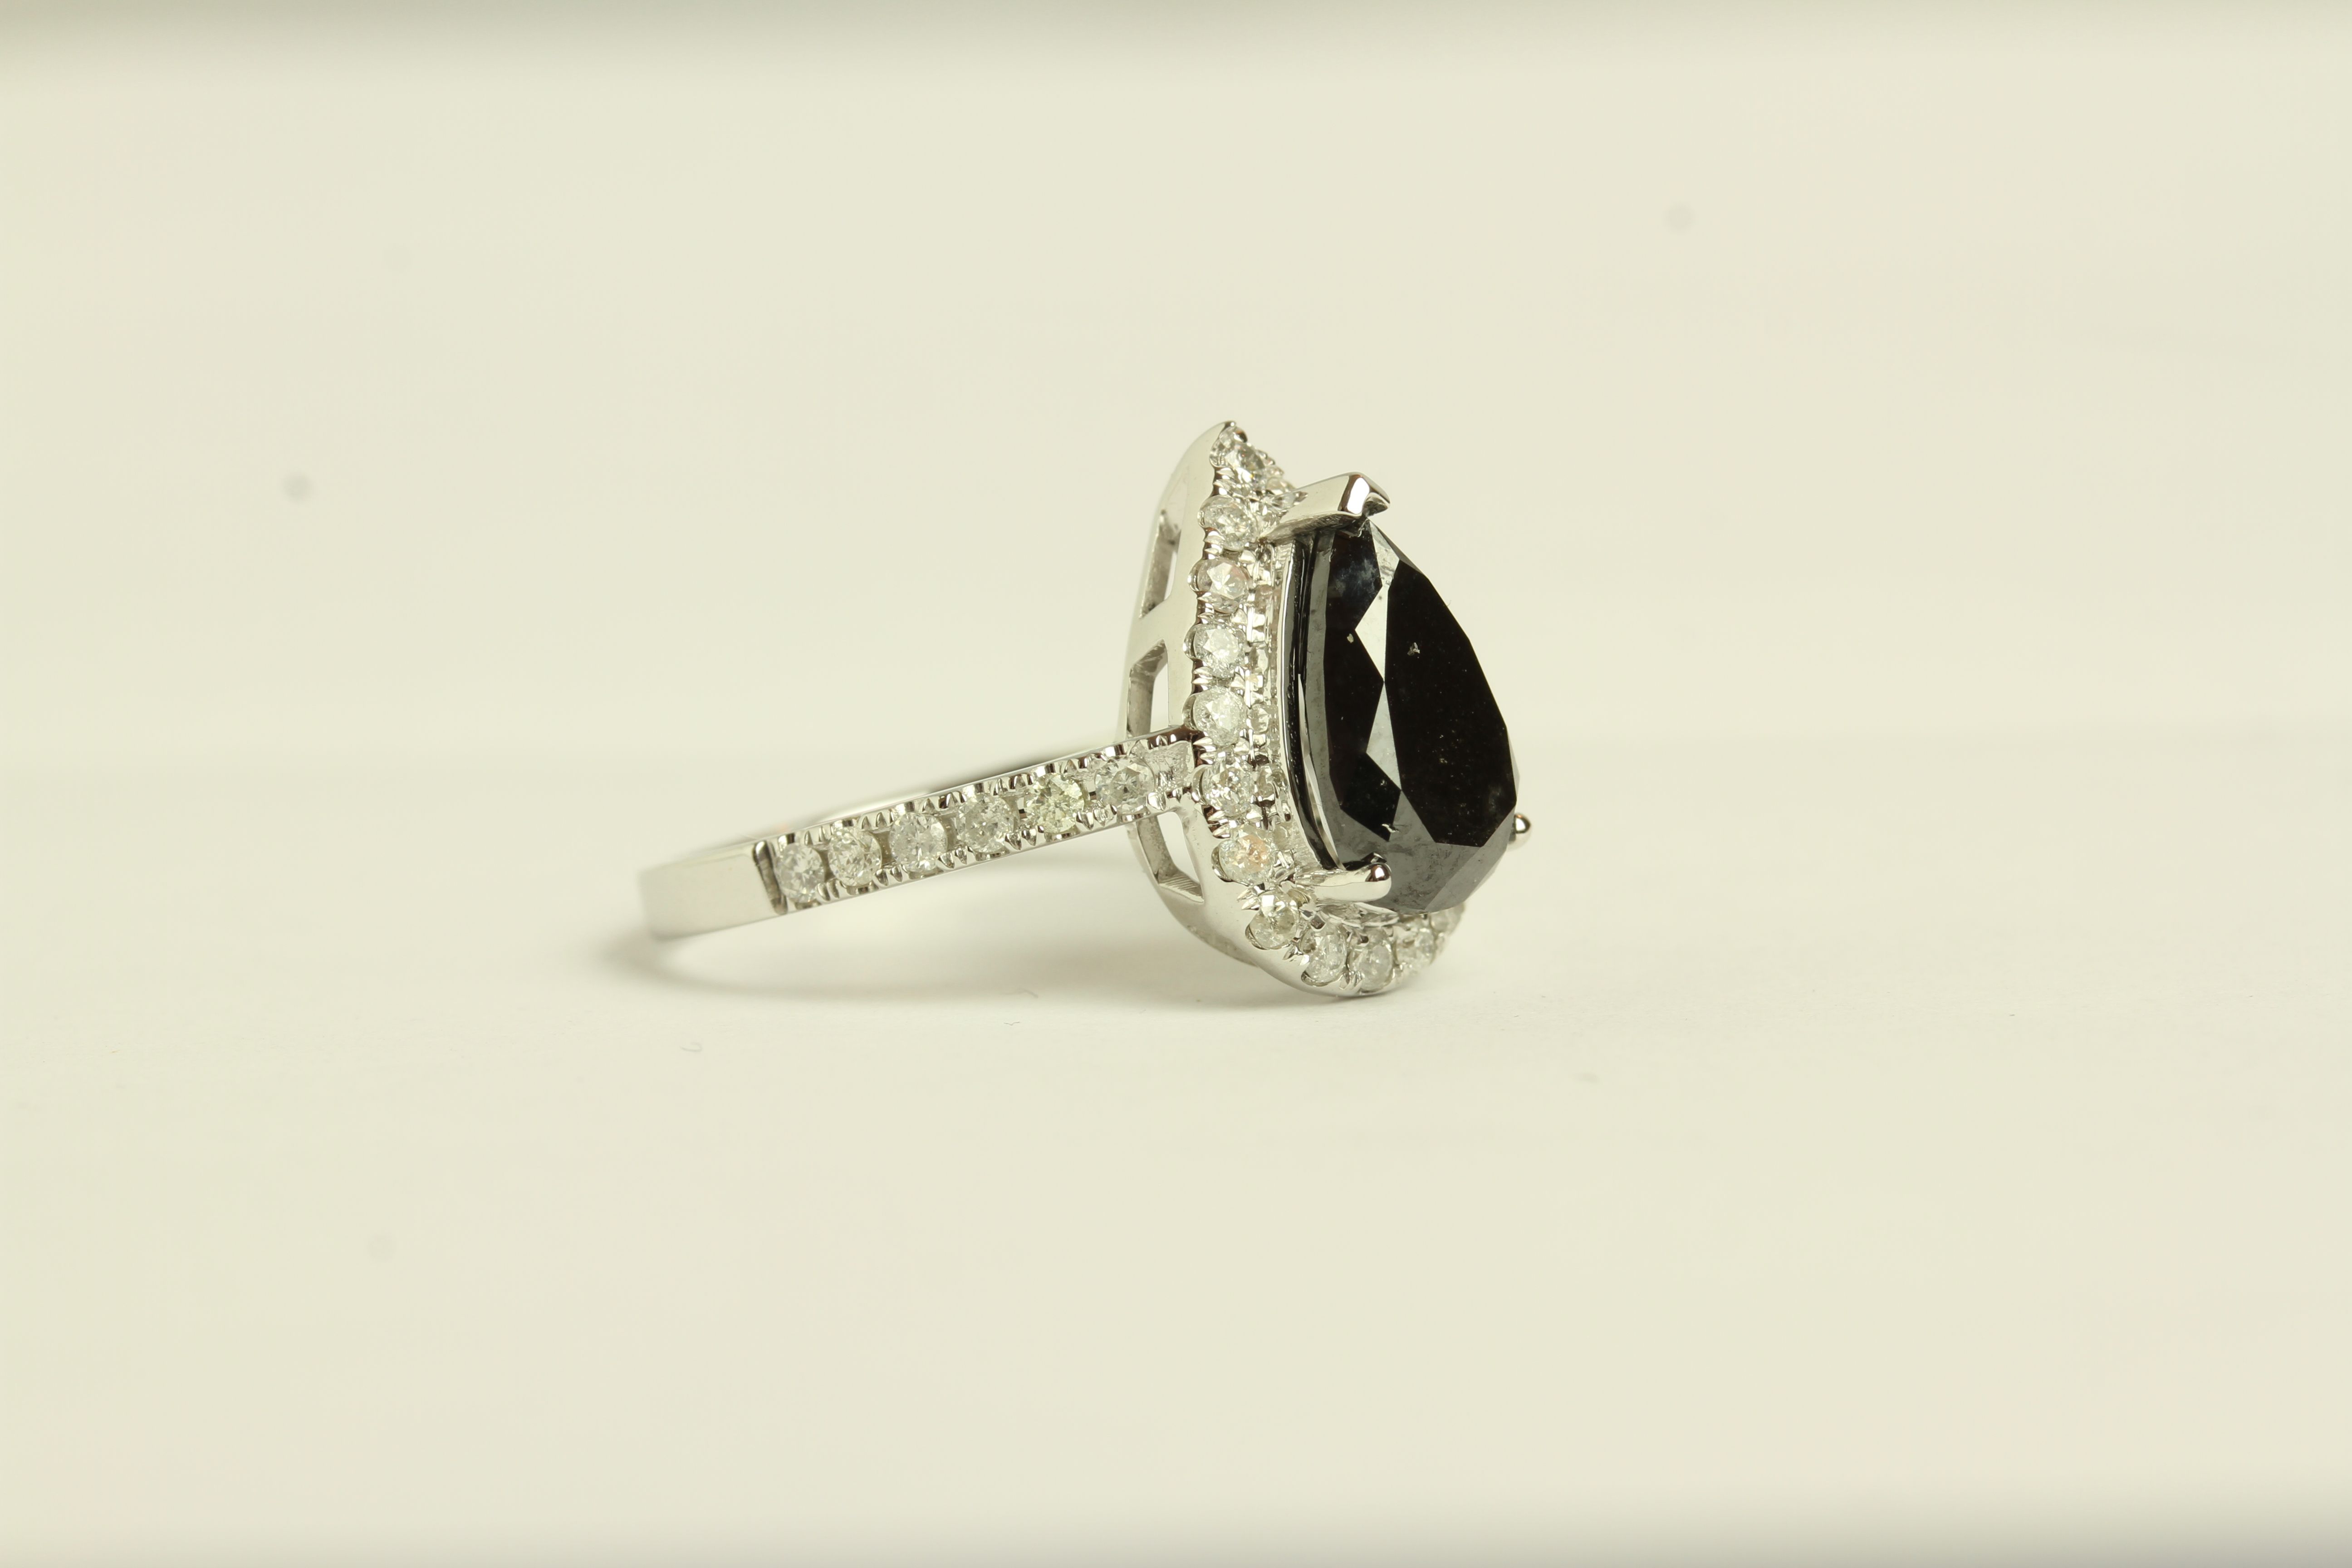 Black and White Diamond ring, set with 1 pear cut black diamond approximately 2.38ct, - Image 3 of 5